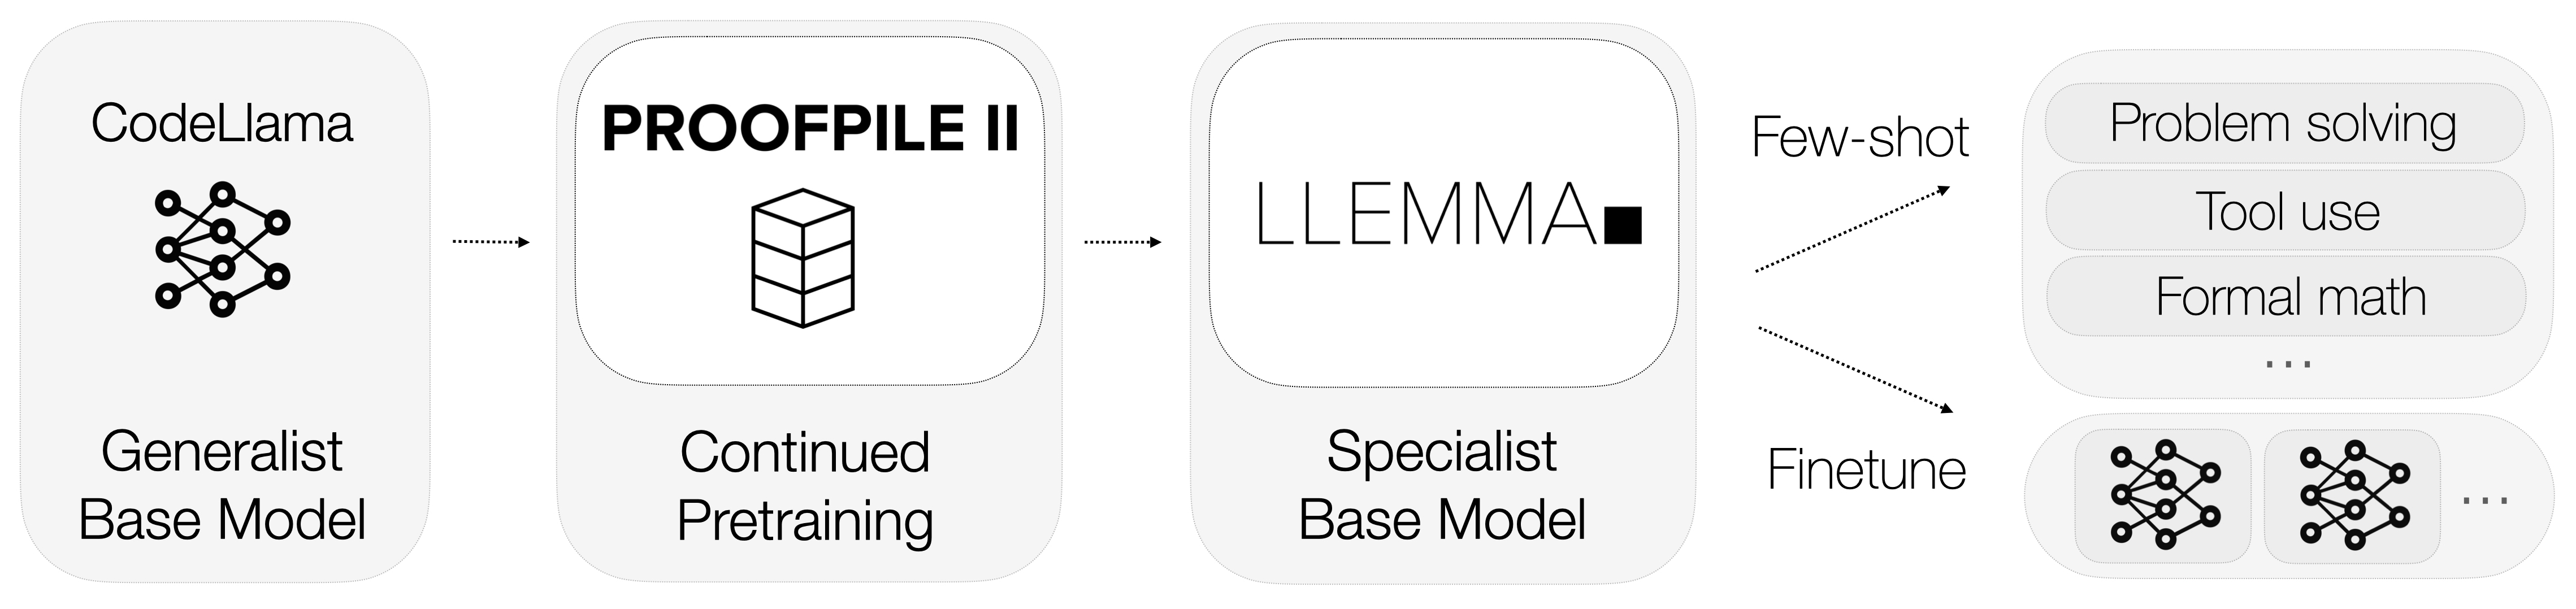 How Does Llemma Work?